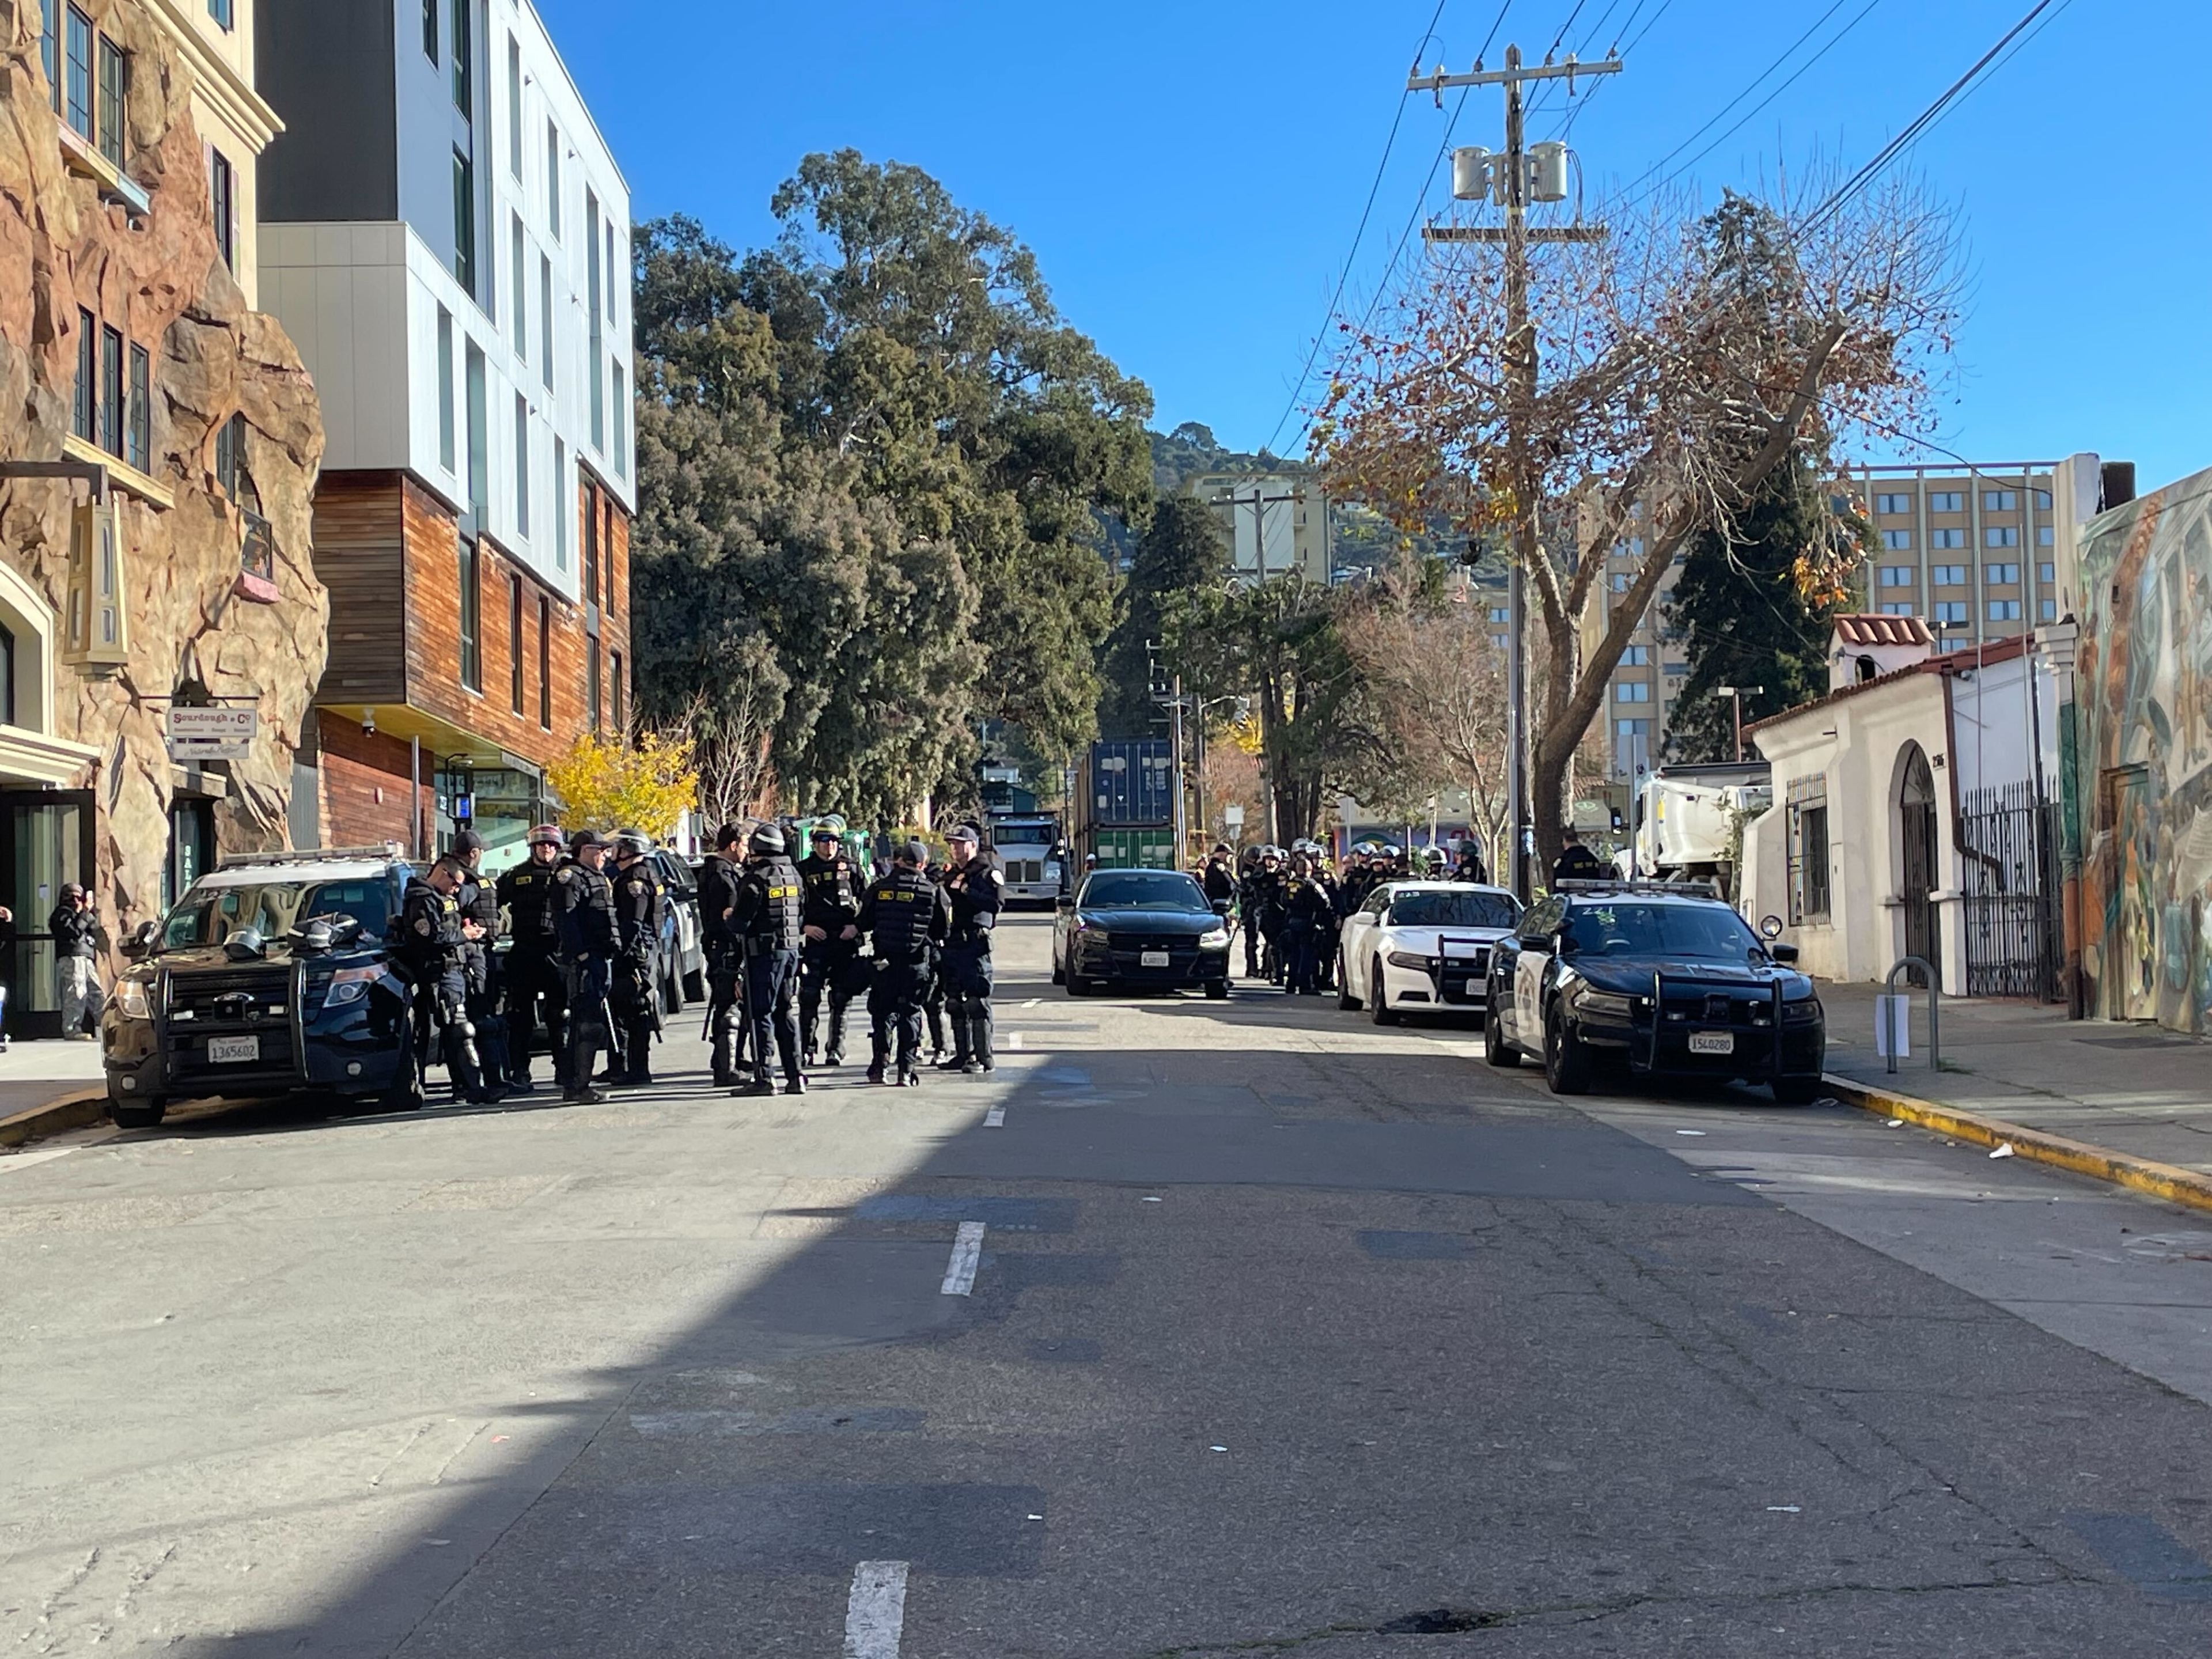 Multiple law enforcement personnel in tactical crowd-control gear gather near a parked patrol vehicle on the sunny side of a city street.